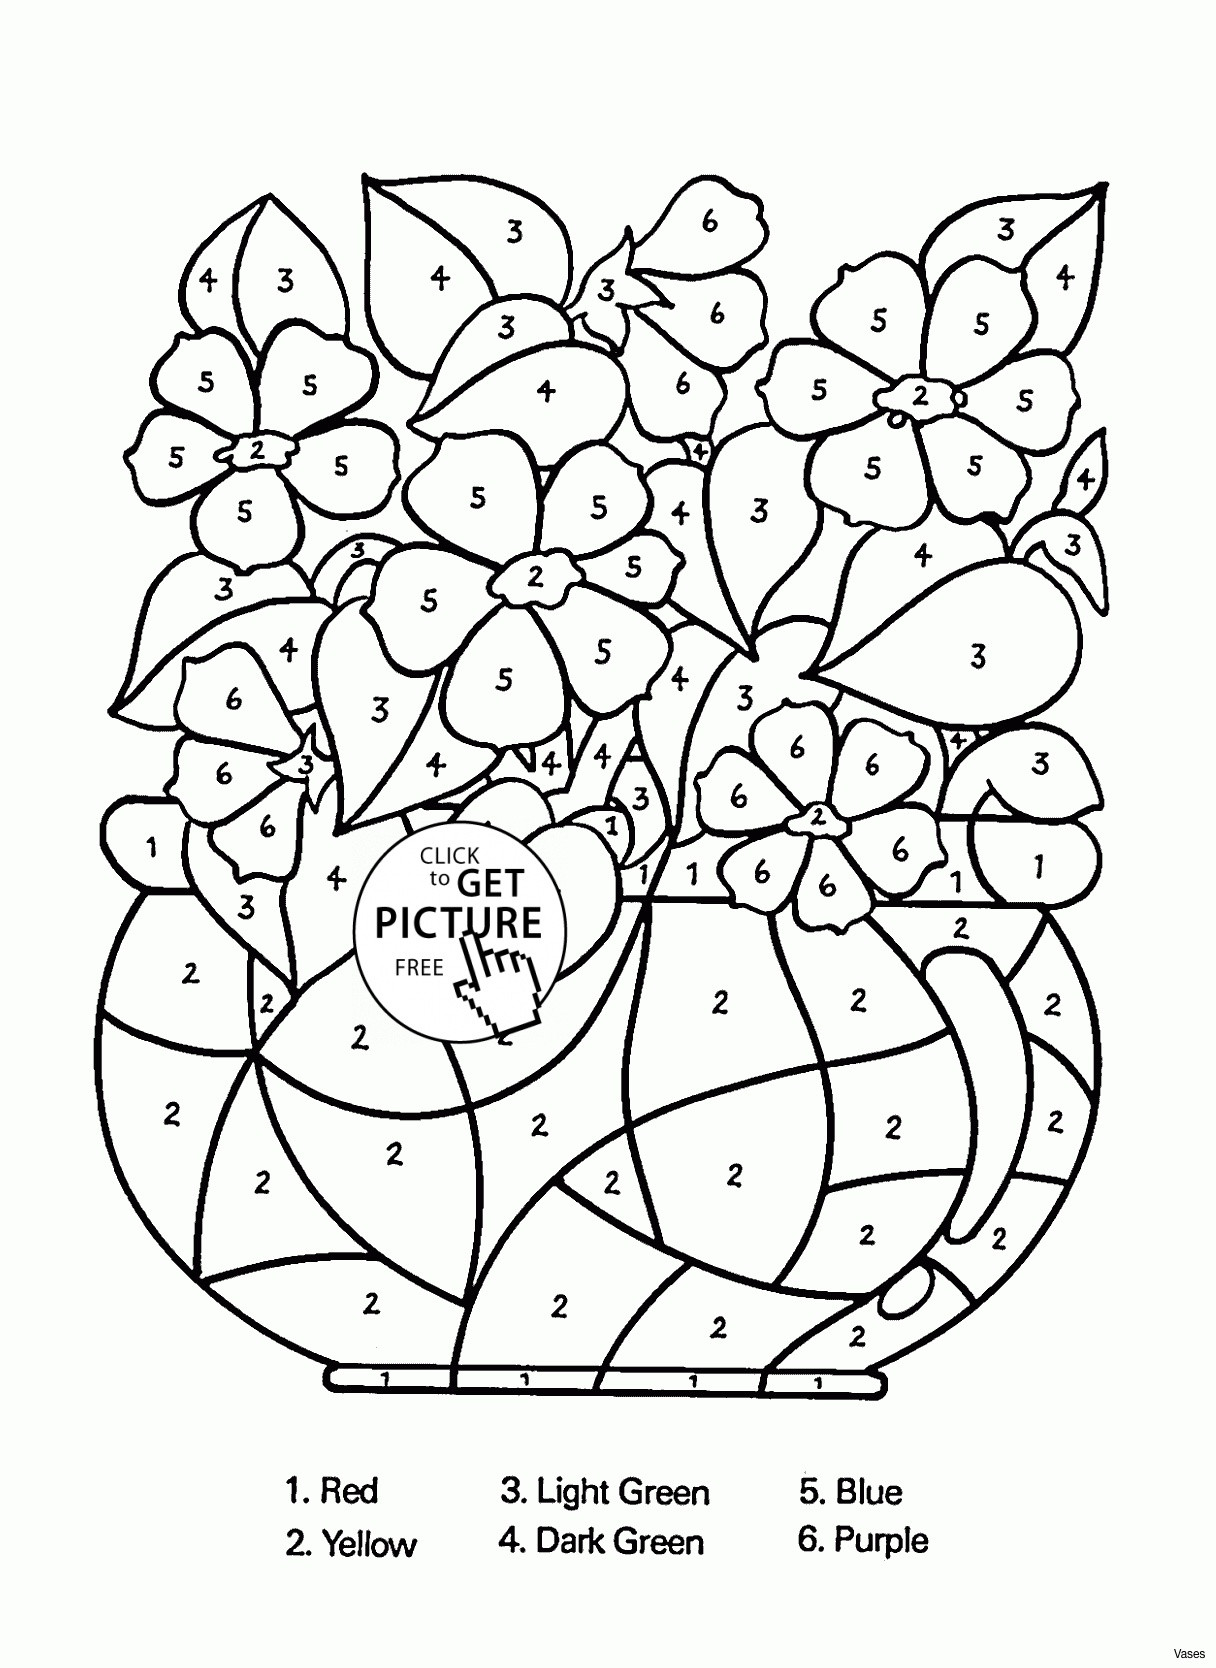 antique flower vases of beautiful cool vases flower vase coloring page pages flowers in a with beautiful cool vases flower vase coloring page pages flowers in a top i 0d